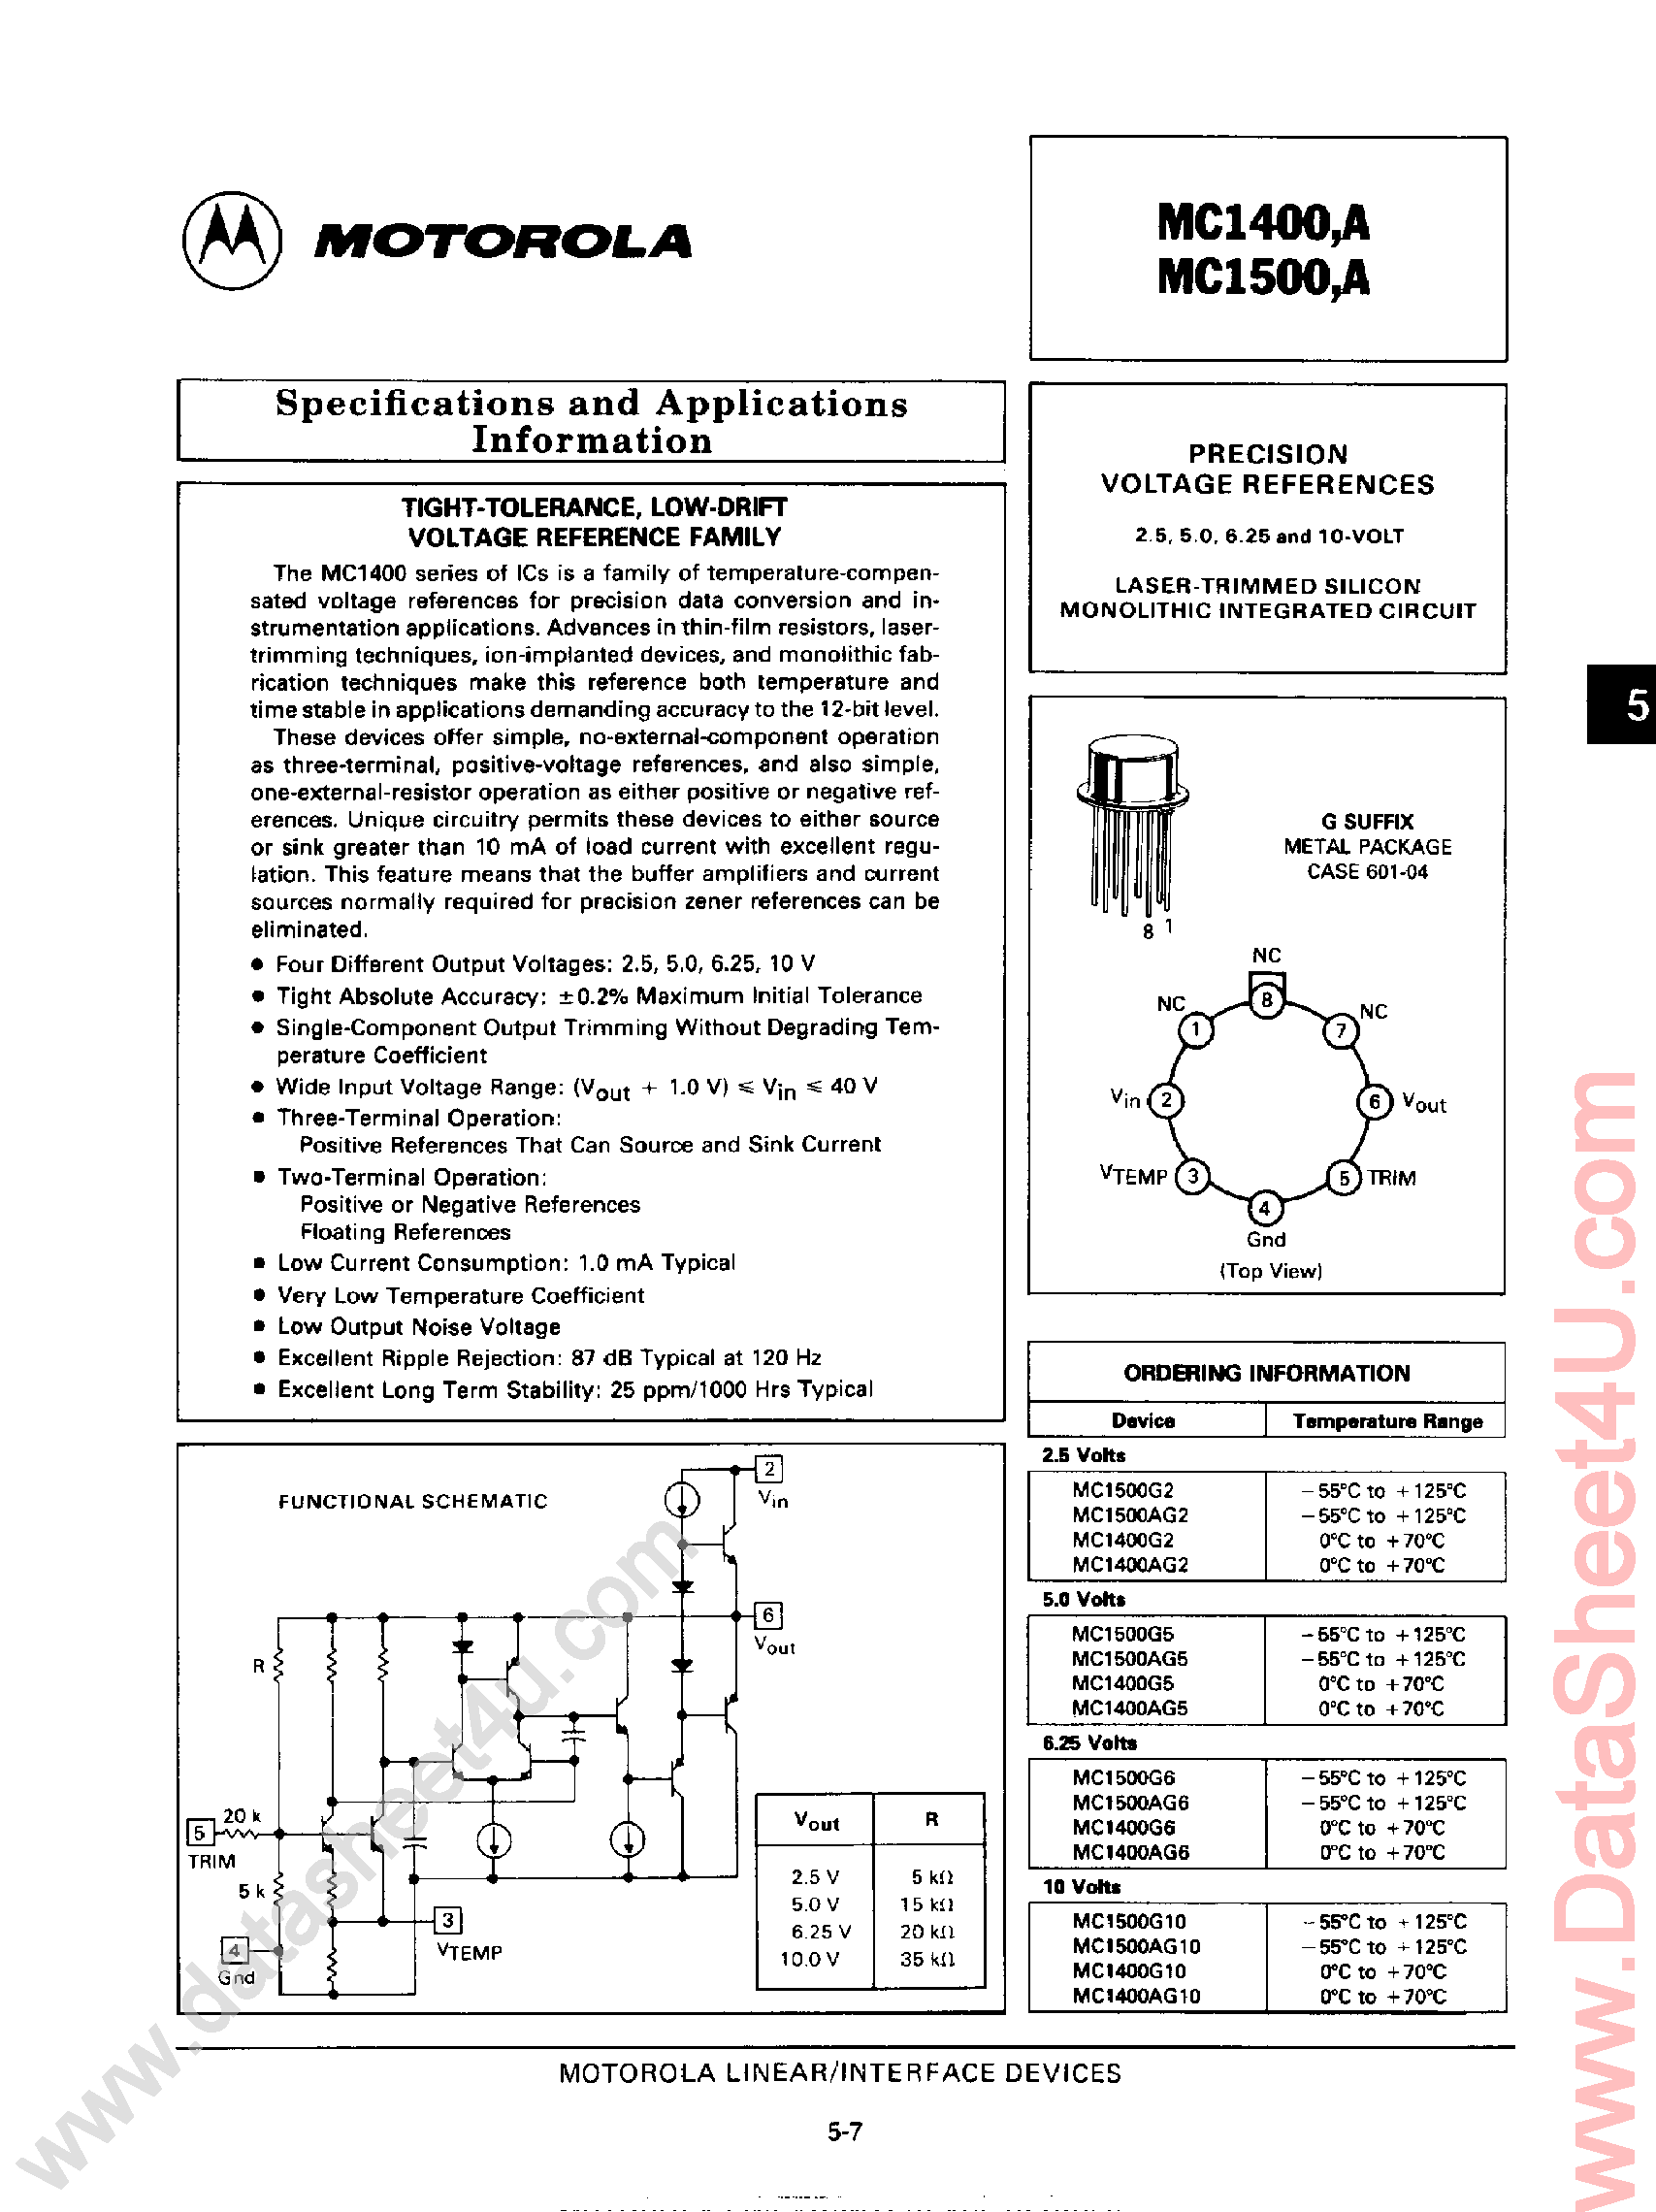 Datasheet MC1400 - (MC1500 / MC1400) Laser Trimmed Silicon Monolithic Integrated Circuit page 1